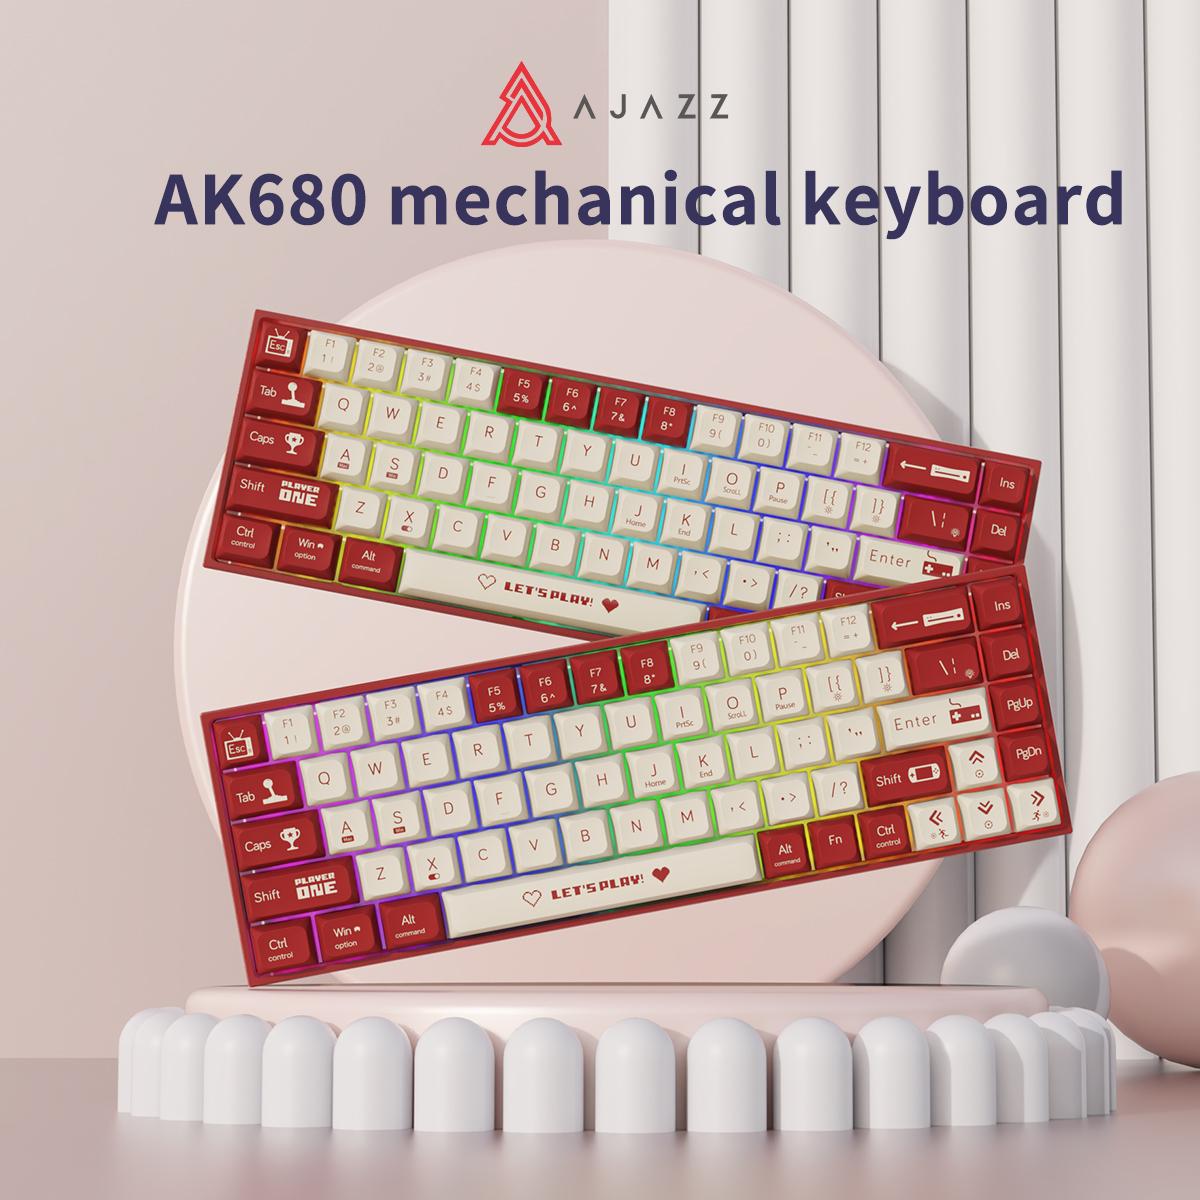 AJAZZ AK680 wired mechanical keyboard 68-key full-key hot-swappable mechanical keyboard, mixed color lighting